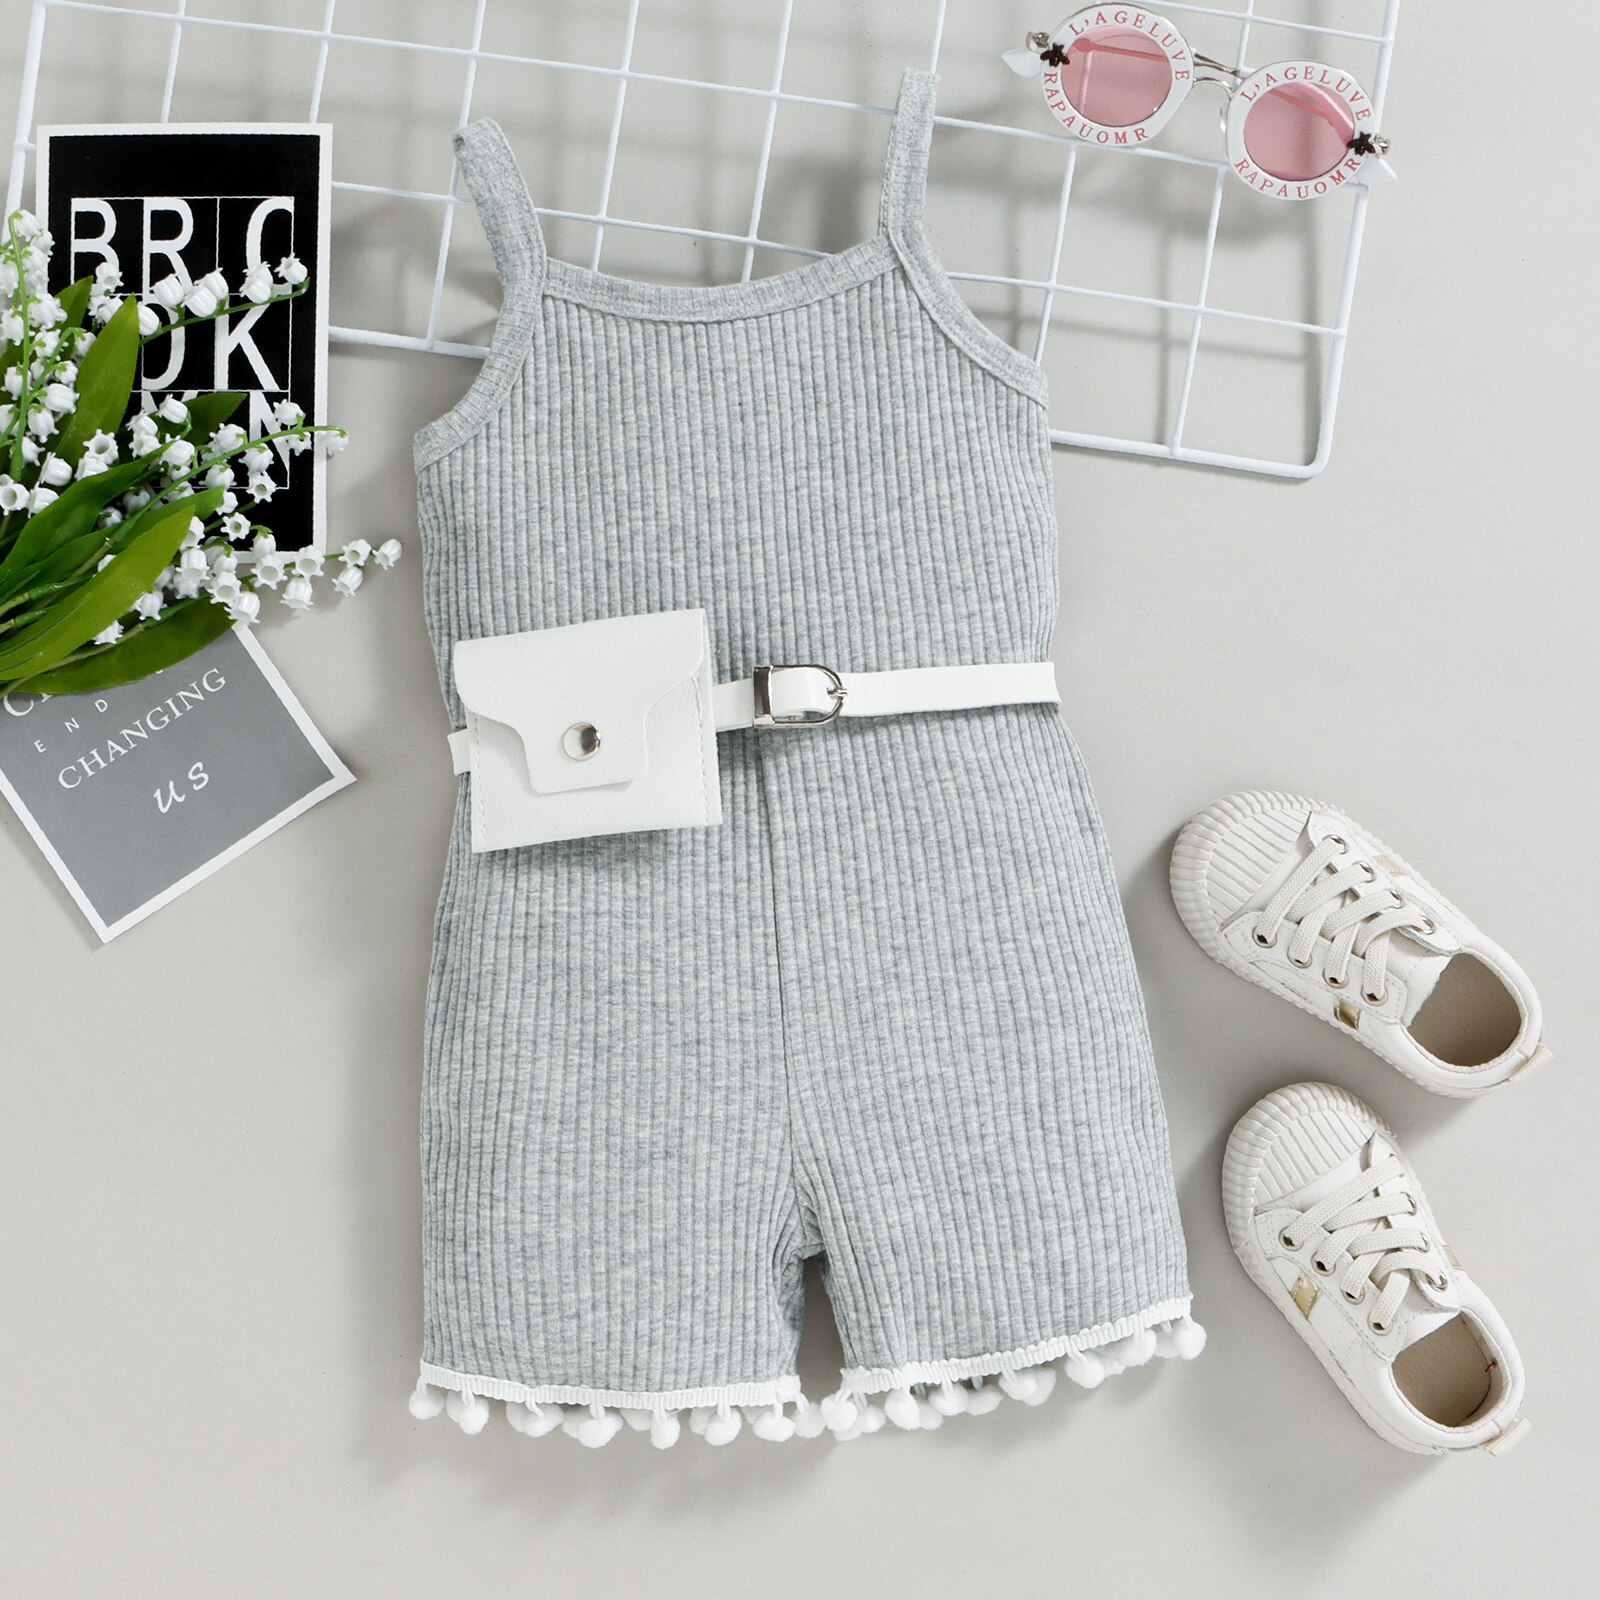 Kids-Summer-Outfit-Contrast-Color-U-Neck-Sleeveless-Playsuit-Waist-Bag-for-Baby-Girls-Pink-Gray-3